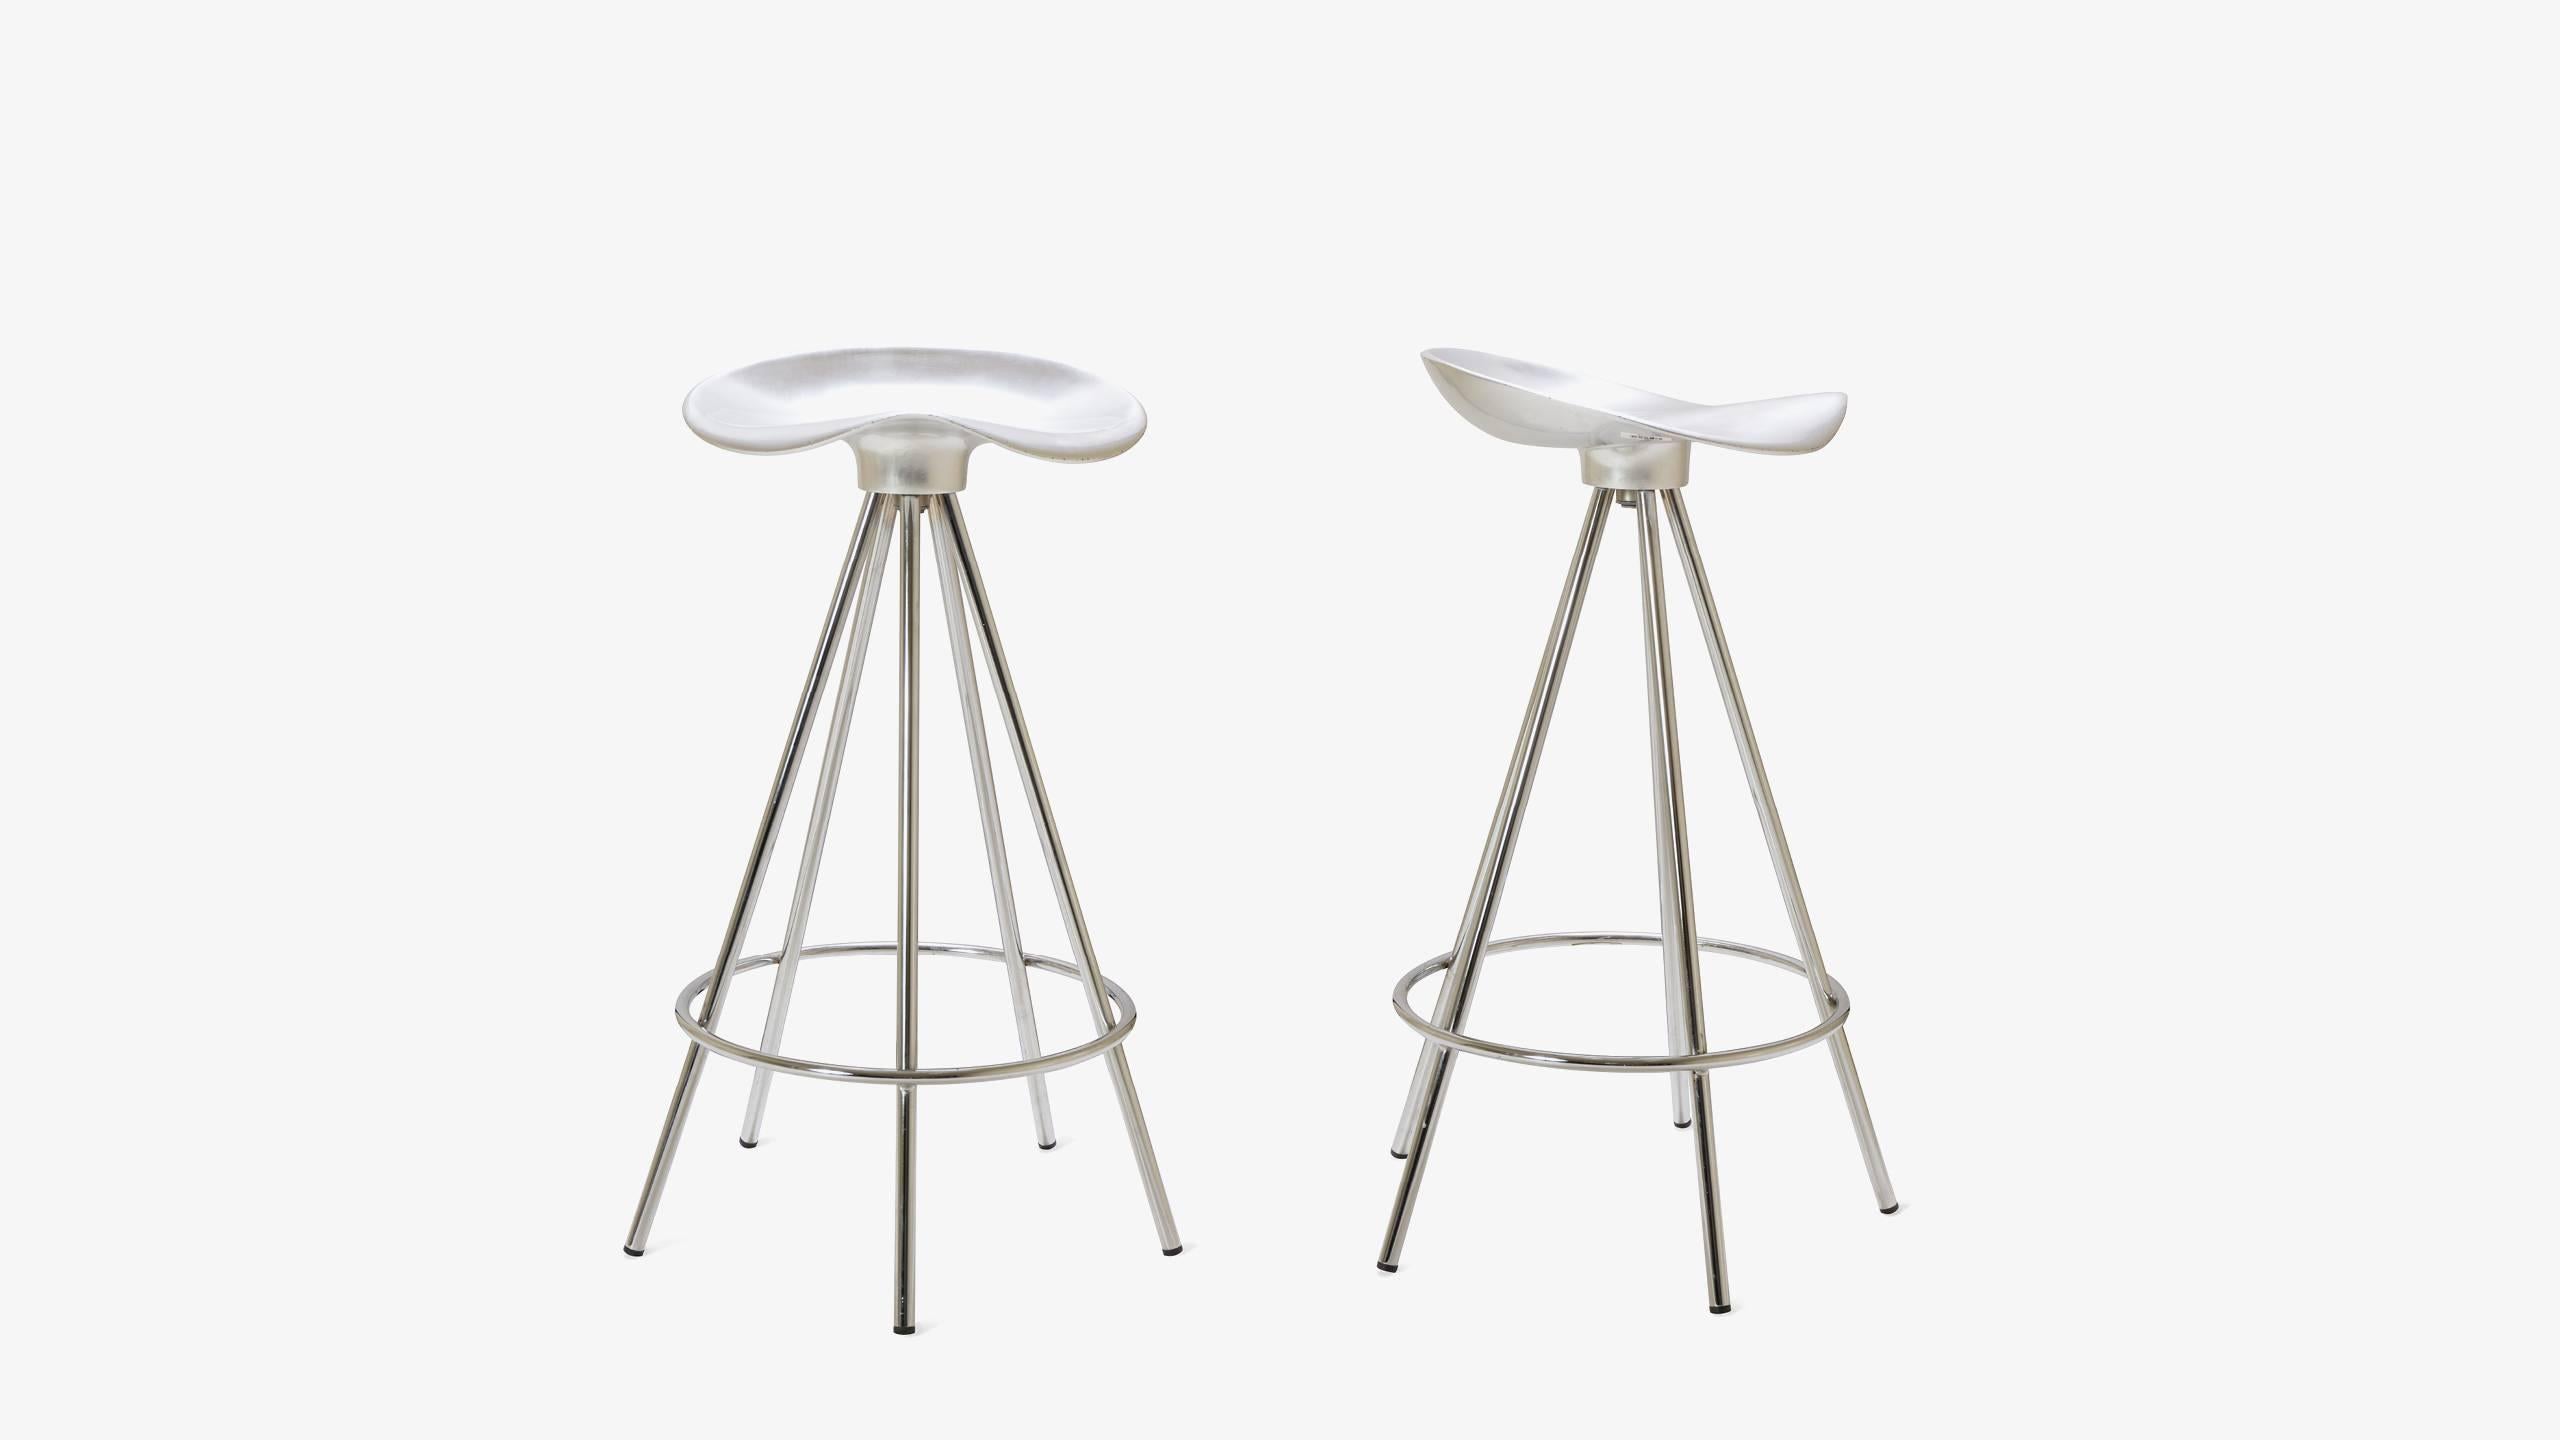 The Jamaica counter stool designed by Pepe Cortes was intended for use in a multitude of environments both commercial and residential. Cortes with experience in the realm of hospitality wanted to design a stool, an essential piece of seating, that